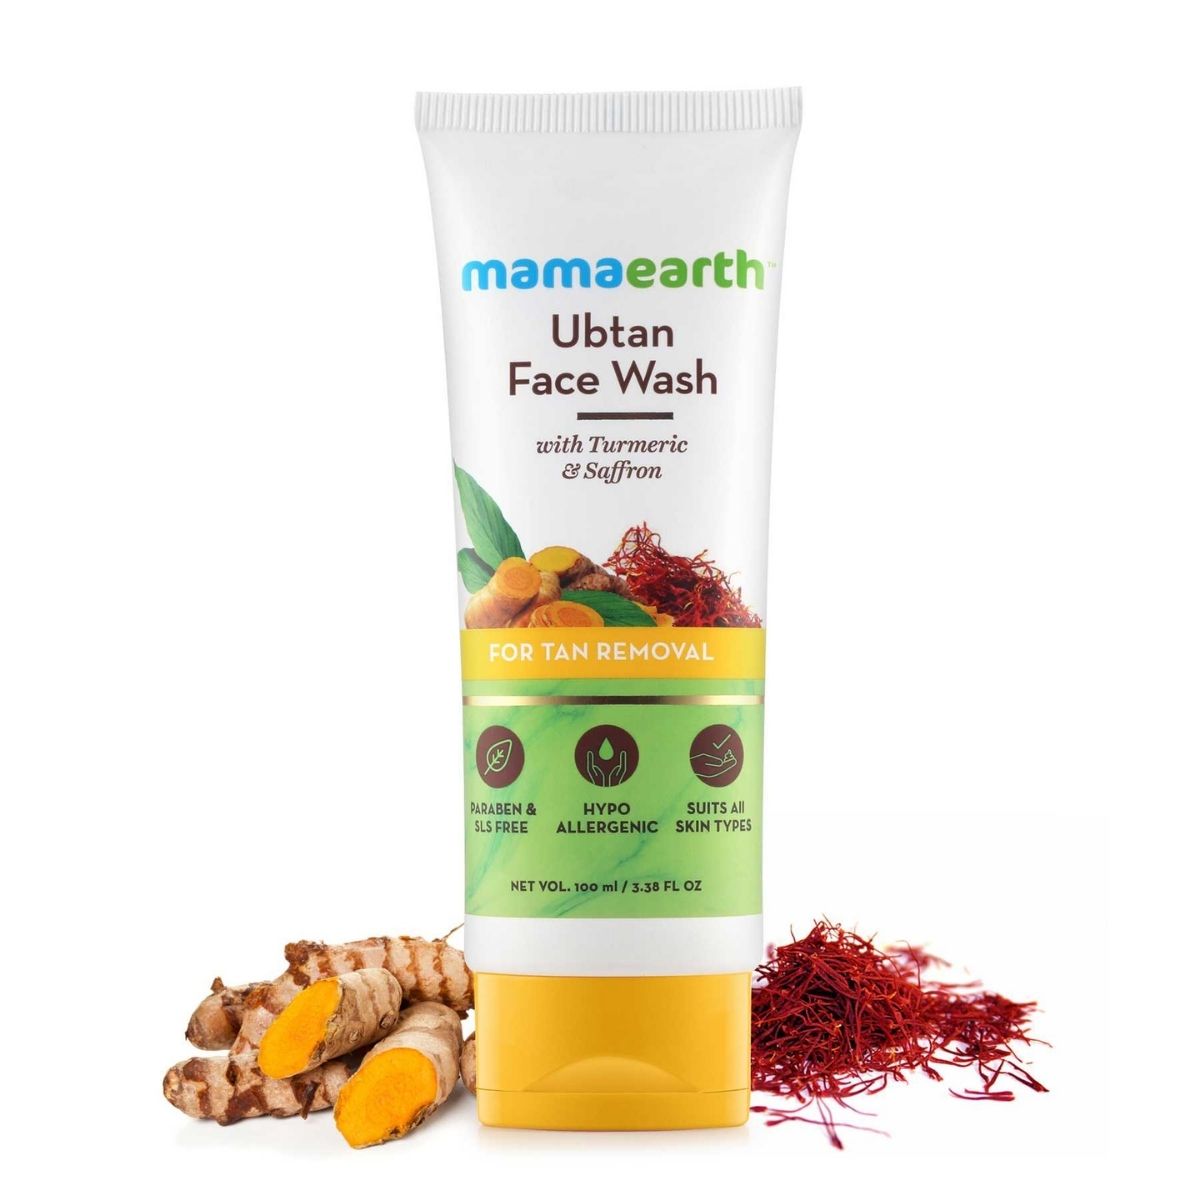 Mamaearth Ubtan Face Wash With Turmeric And Saffron For Tan Removal, 100ml